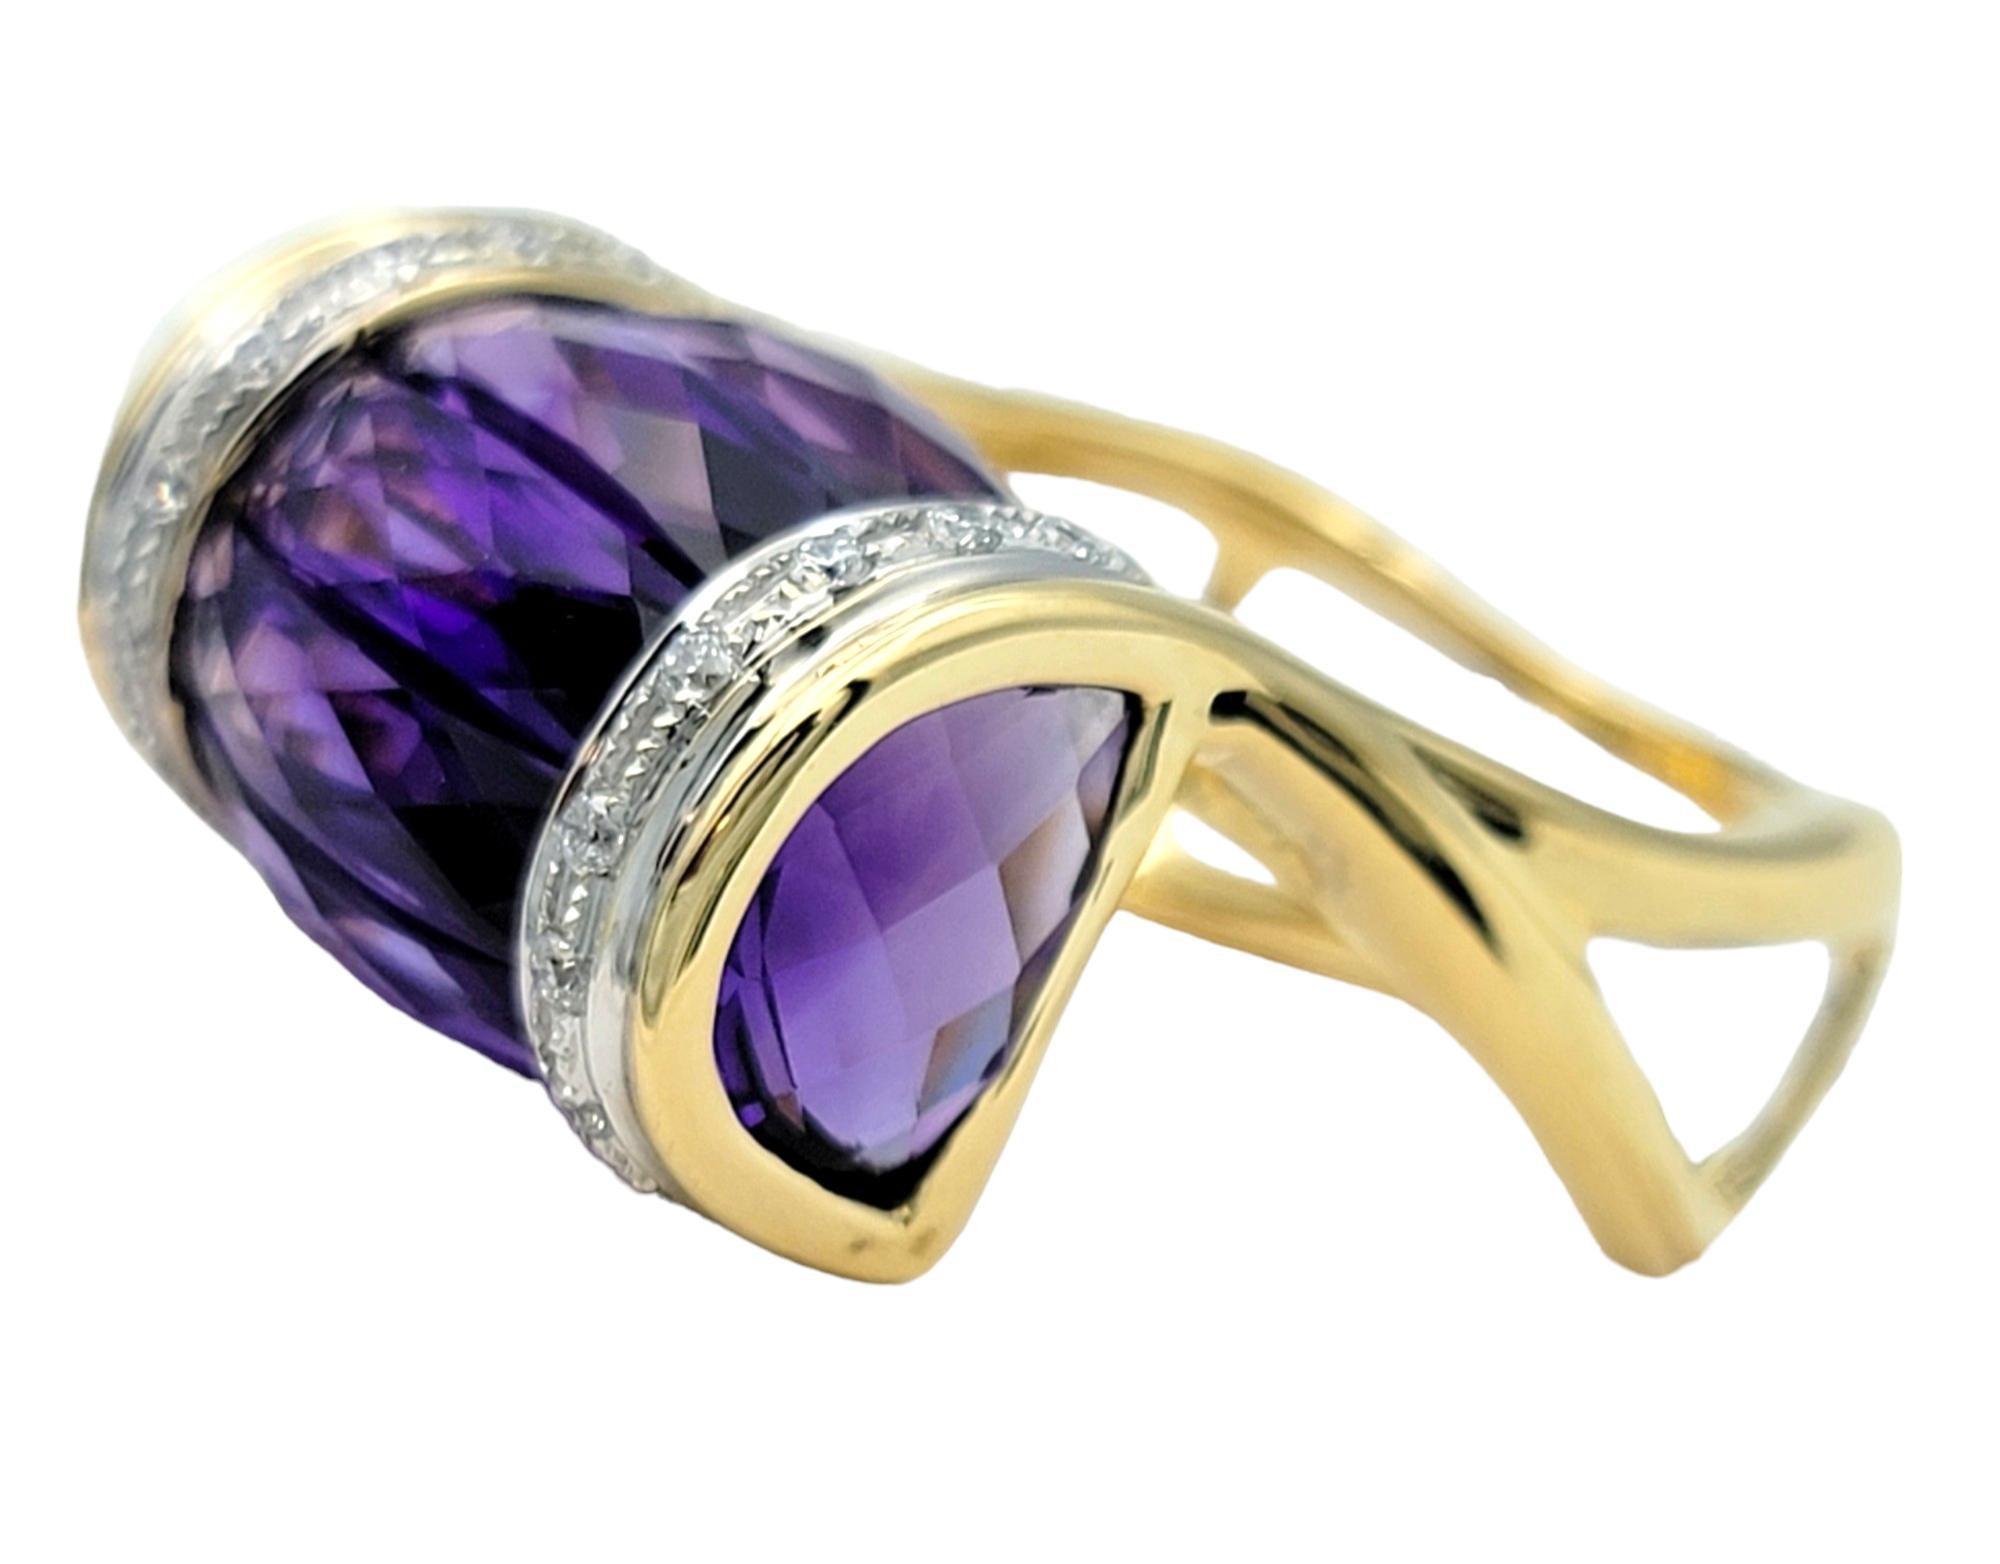 Bellarri Amethyst and Diamond Asymmetrical Cocktail Ring in 18 Karat Yellow Gold In Good Condition For Sale In Scottsdale, AZ